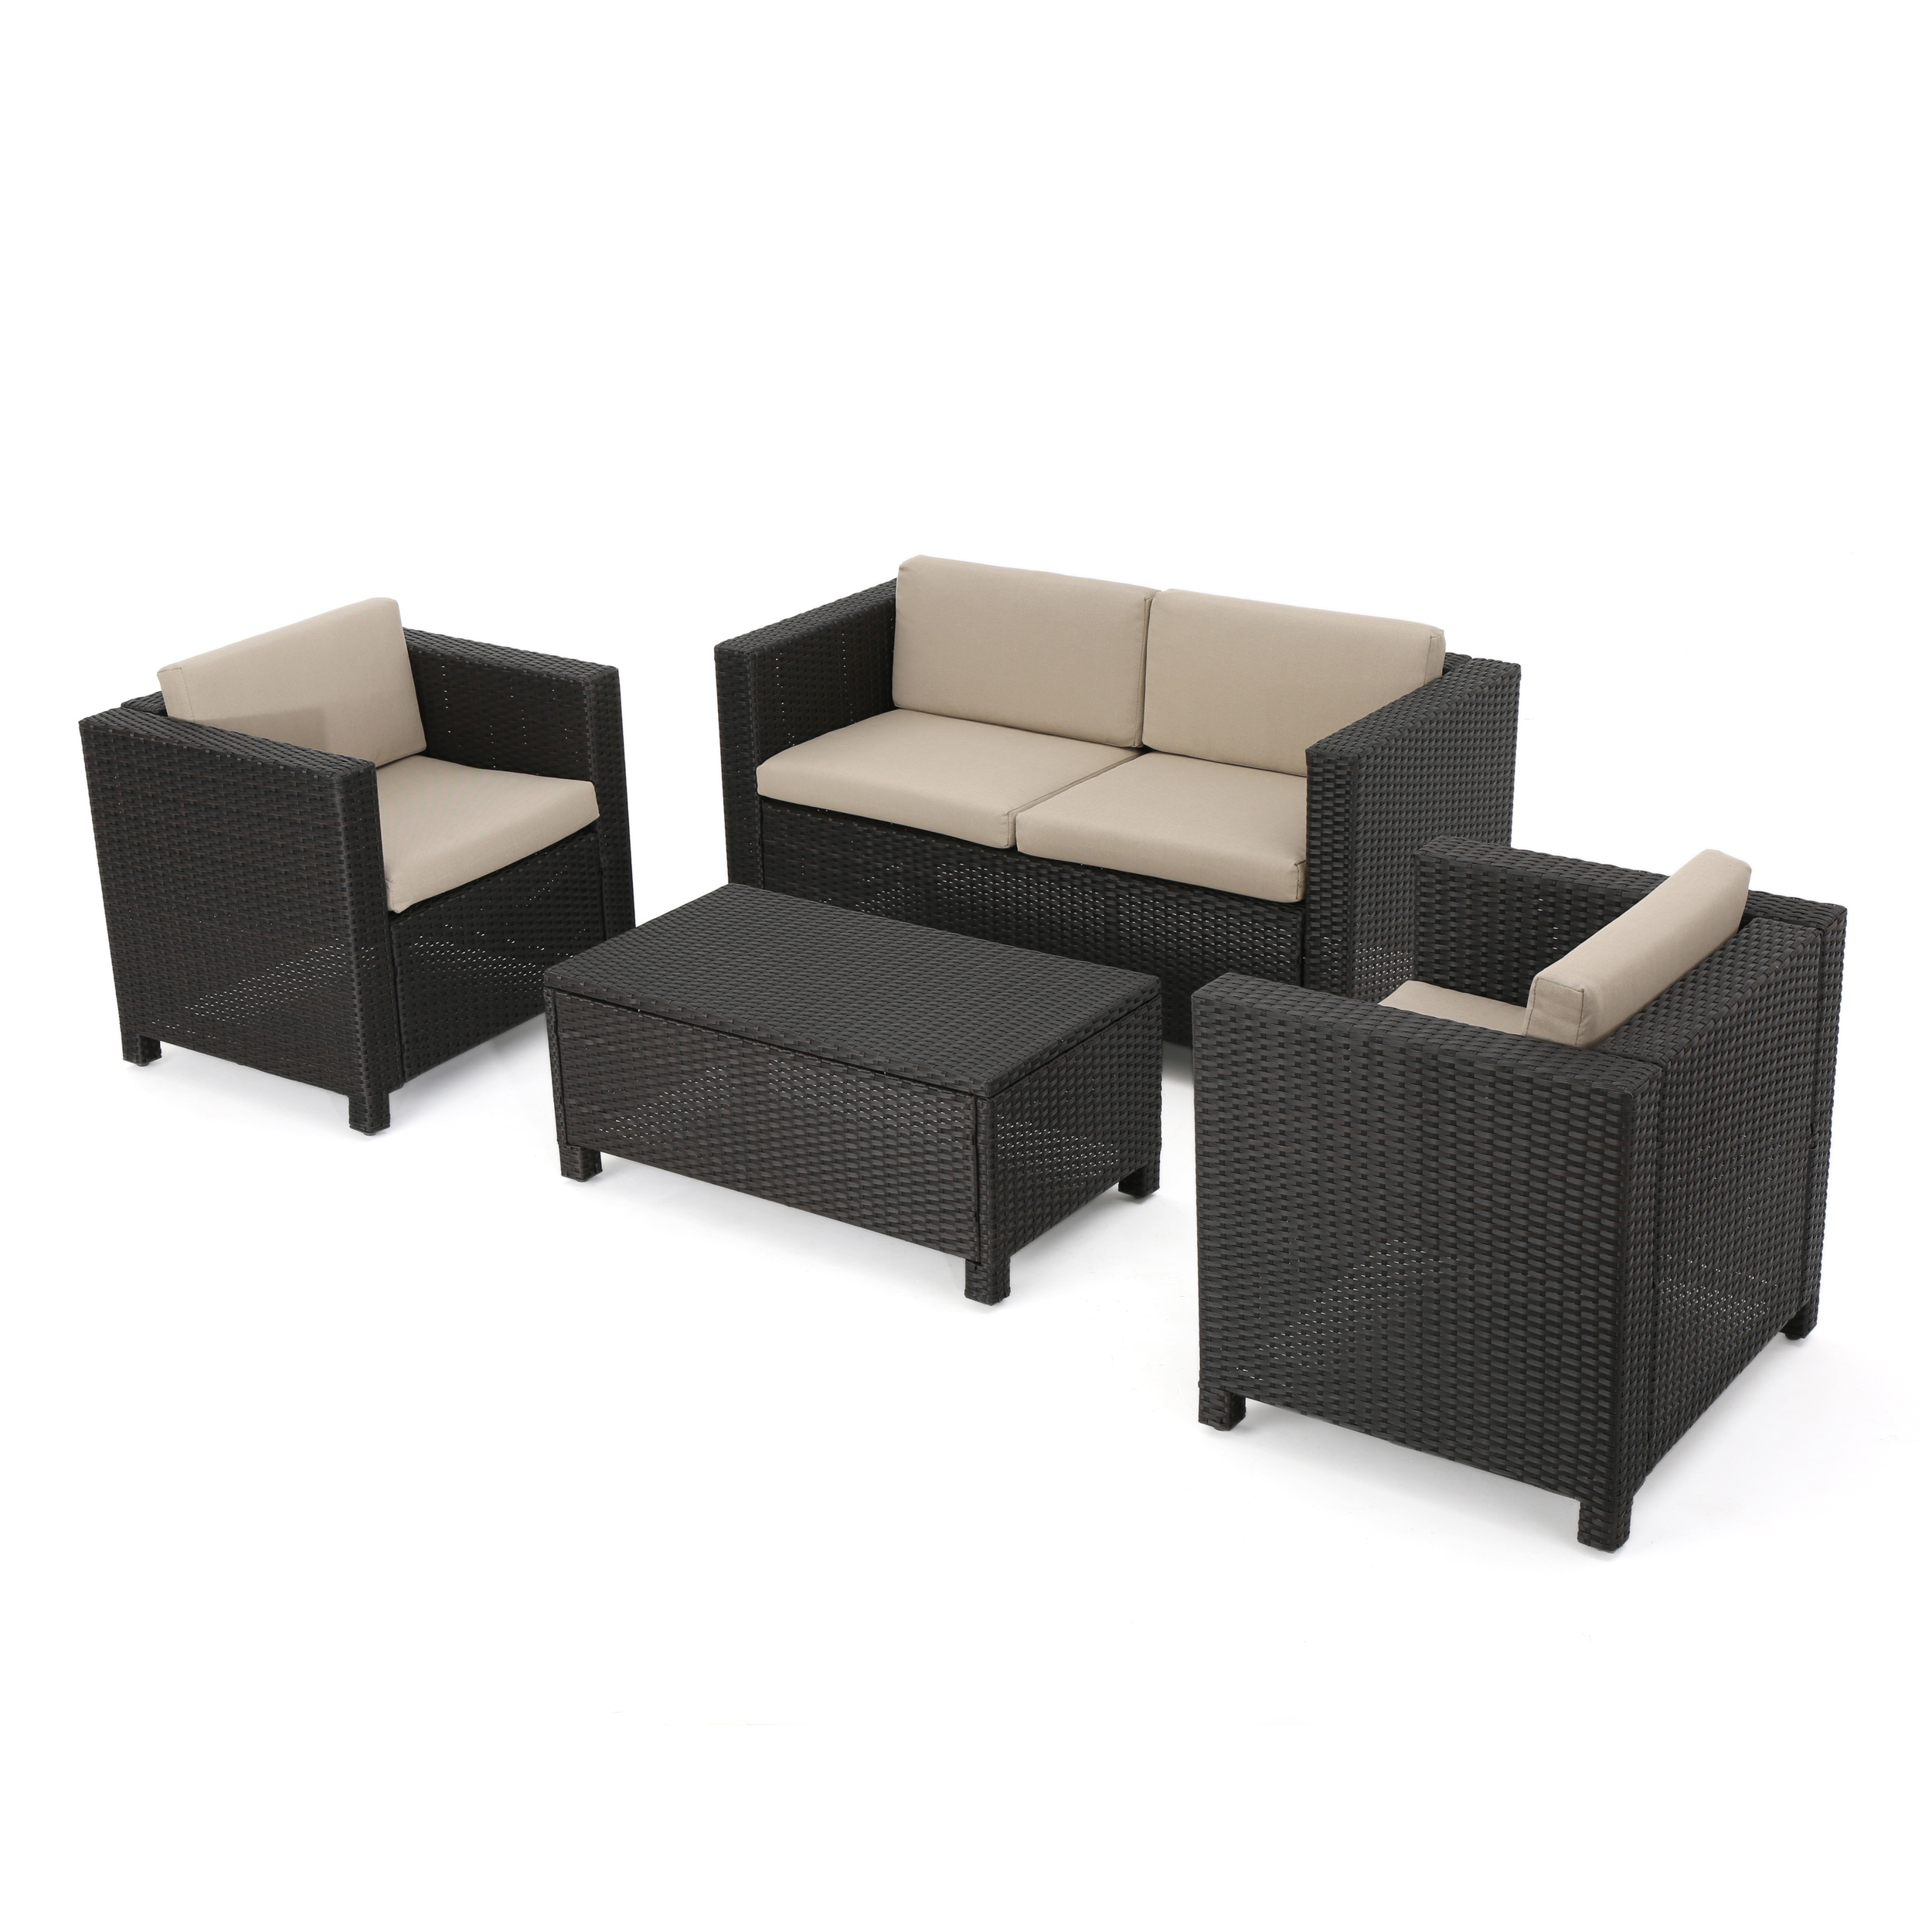 Cascada 4 Piece Wicker Chat Set with Cushions and Cover, Dark Brown, Beige - image 3 of 9